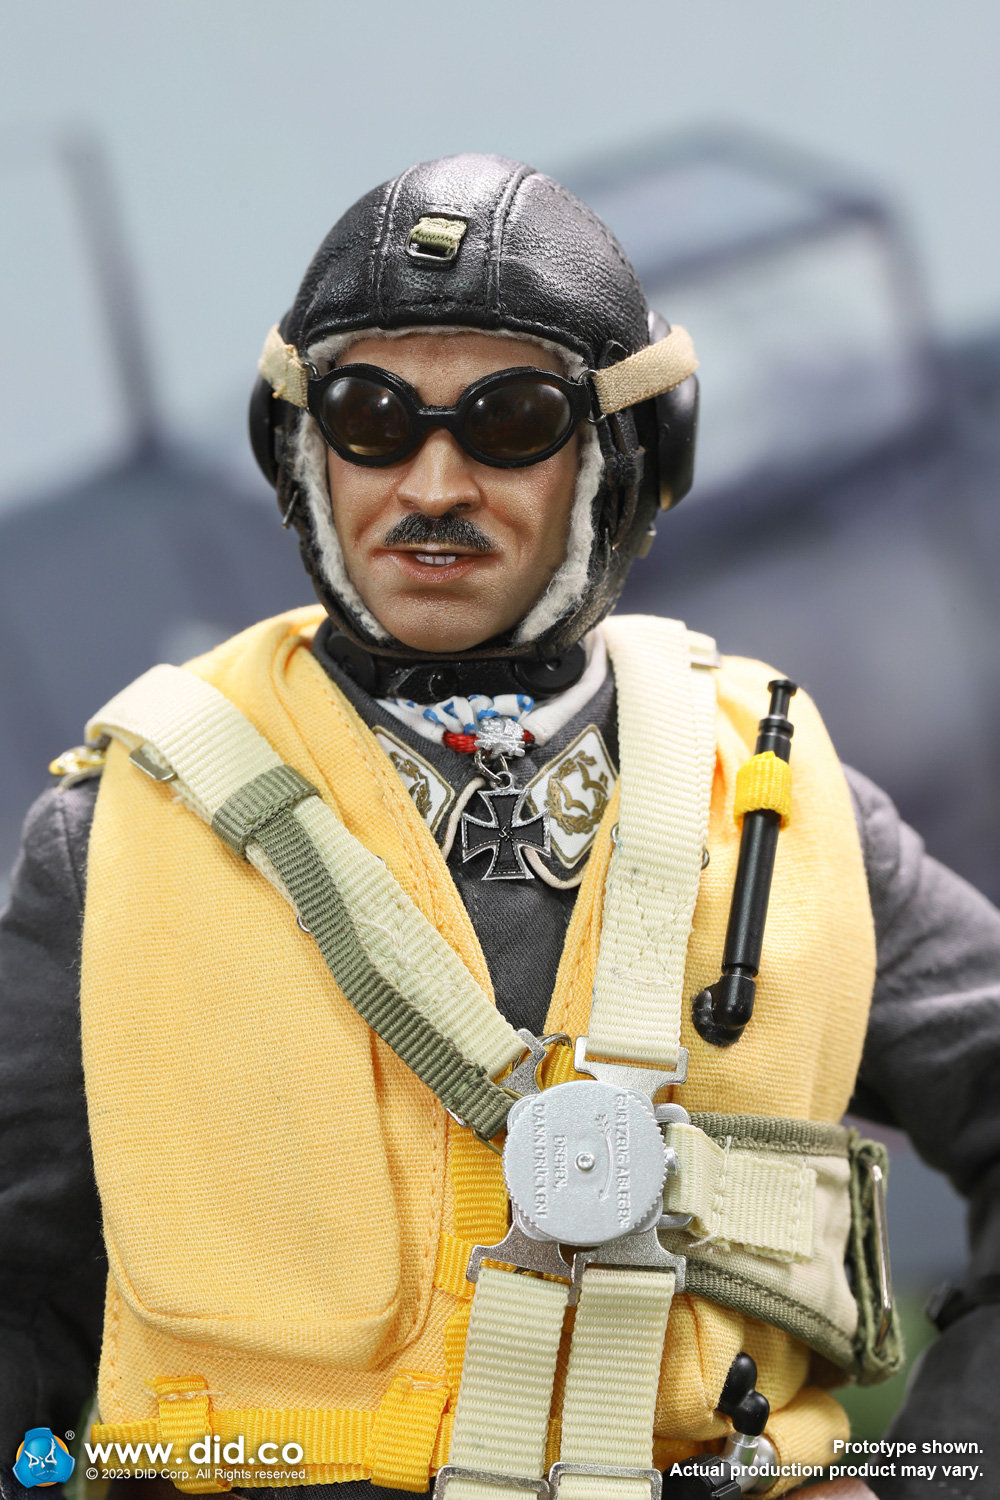 military - NEW PRODUCT: DiD: D80165 WWII German Luftwaffe Ace Pilot – Adolf Galland 1823